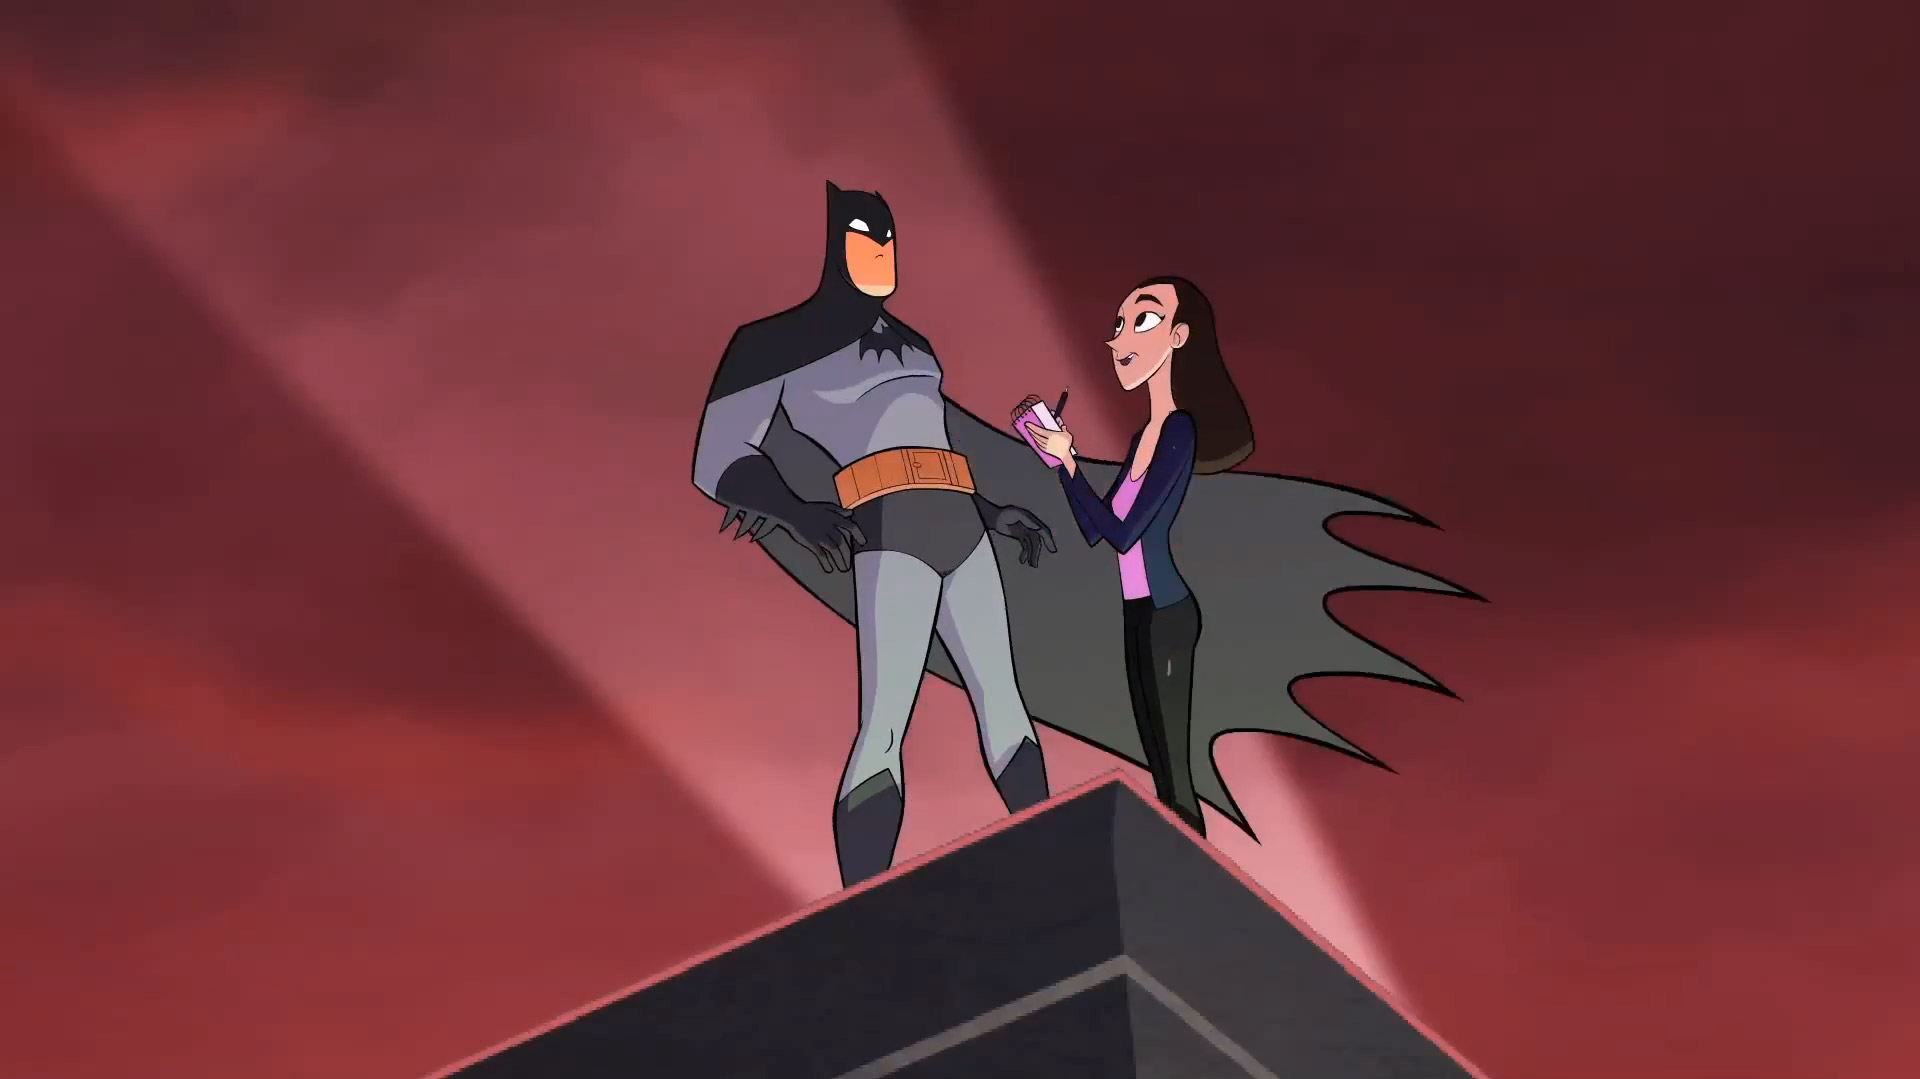 lois-lane-tries-to-interview-batman-in-animated-short-7.jpg